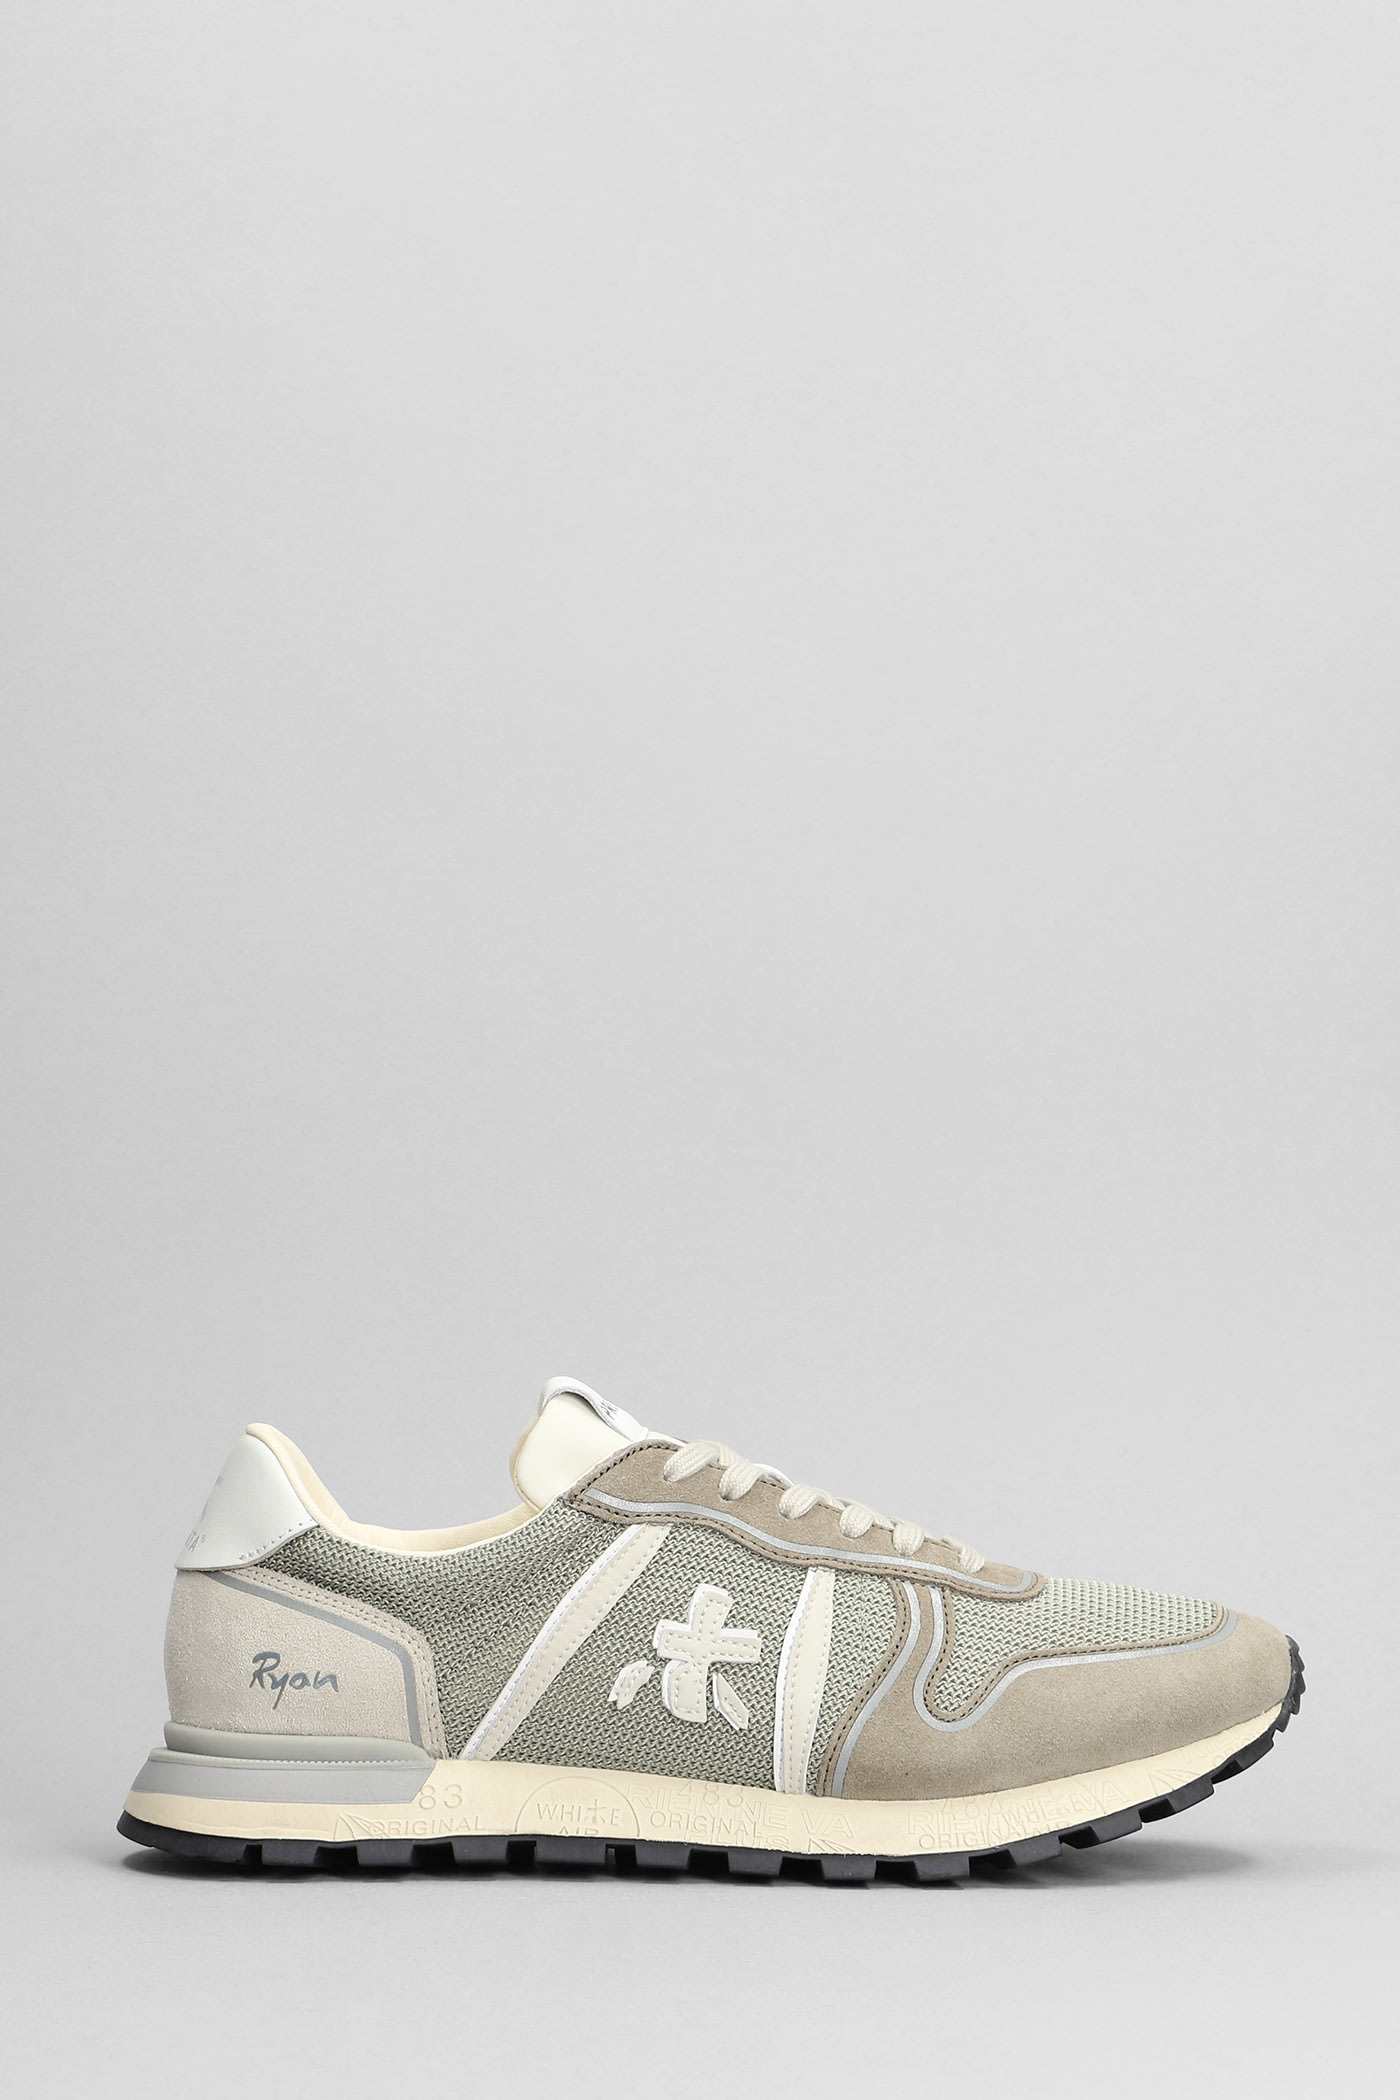 Ryan Sneakers In Taupe Suede And Fabric